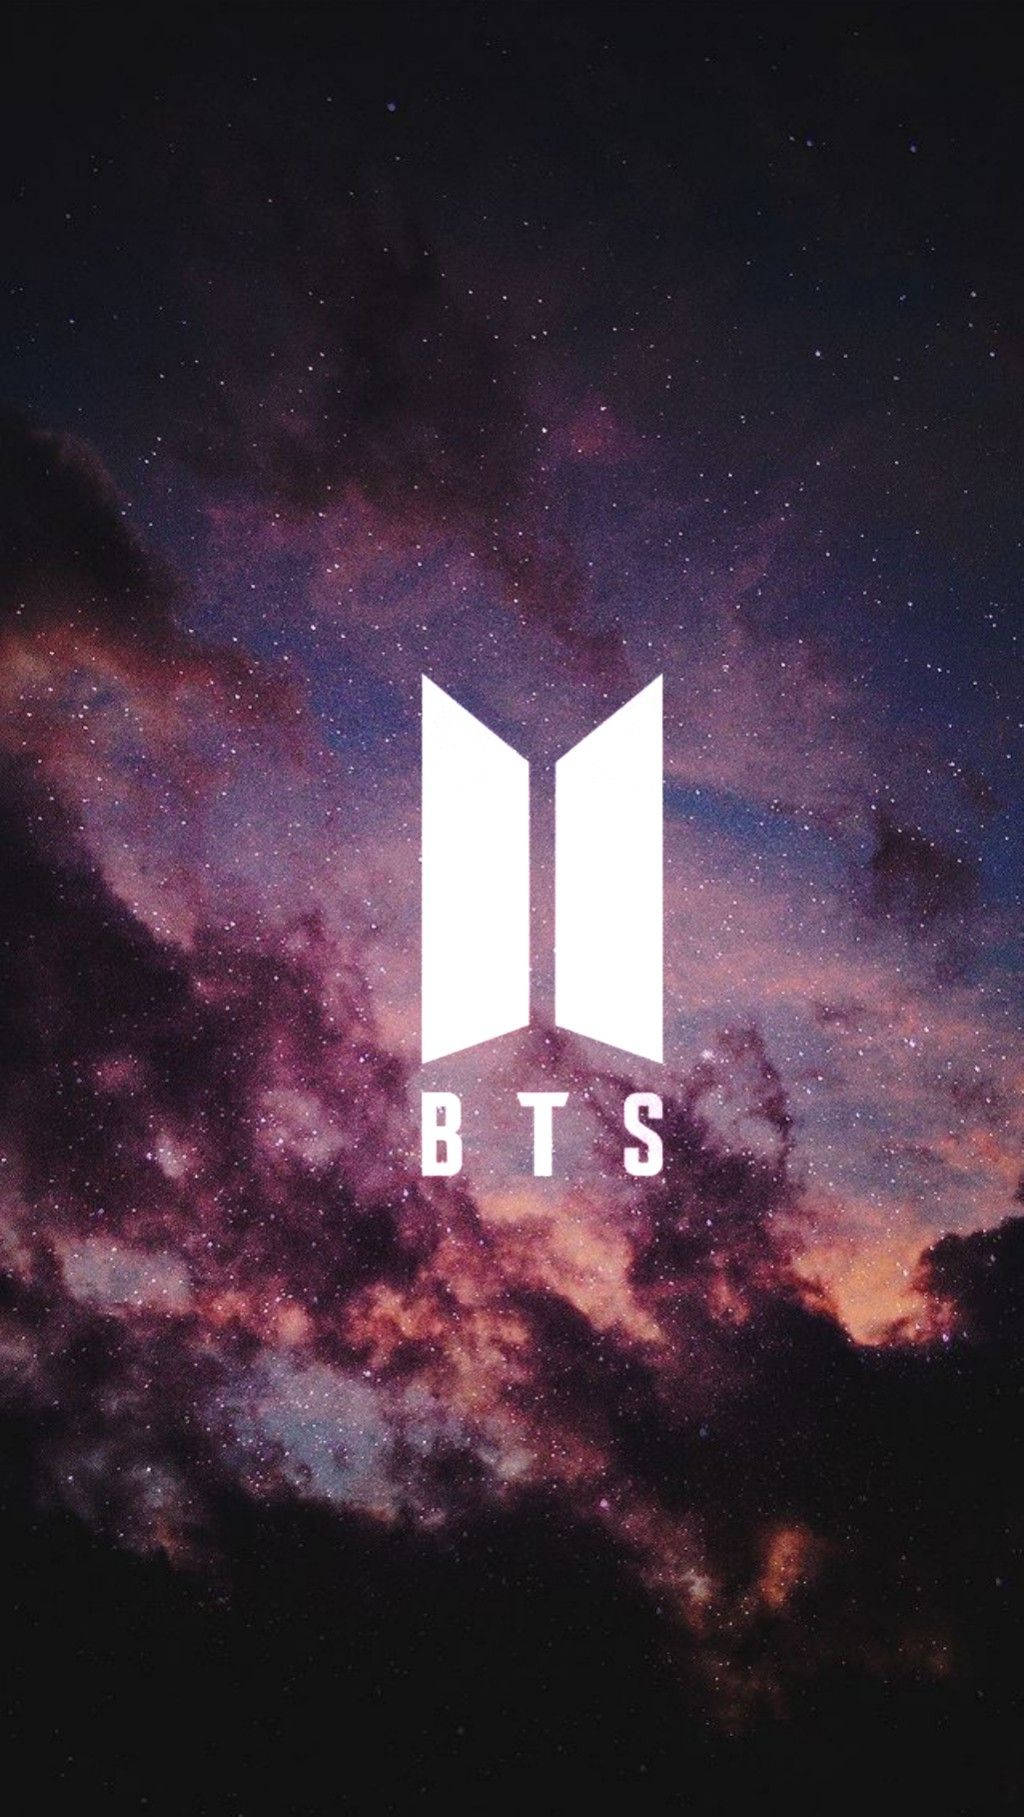 Bts Army - Galaxy Background Wallpaper Download | MobCup